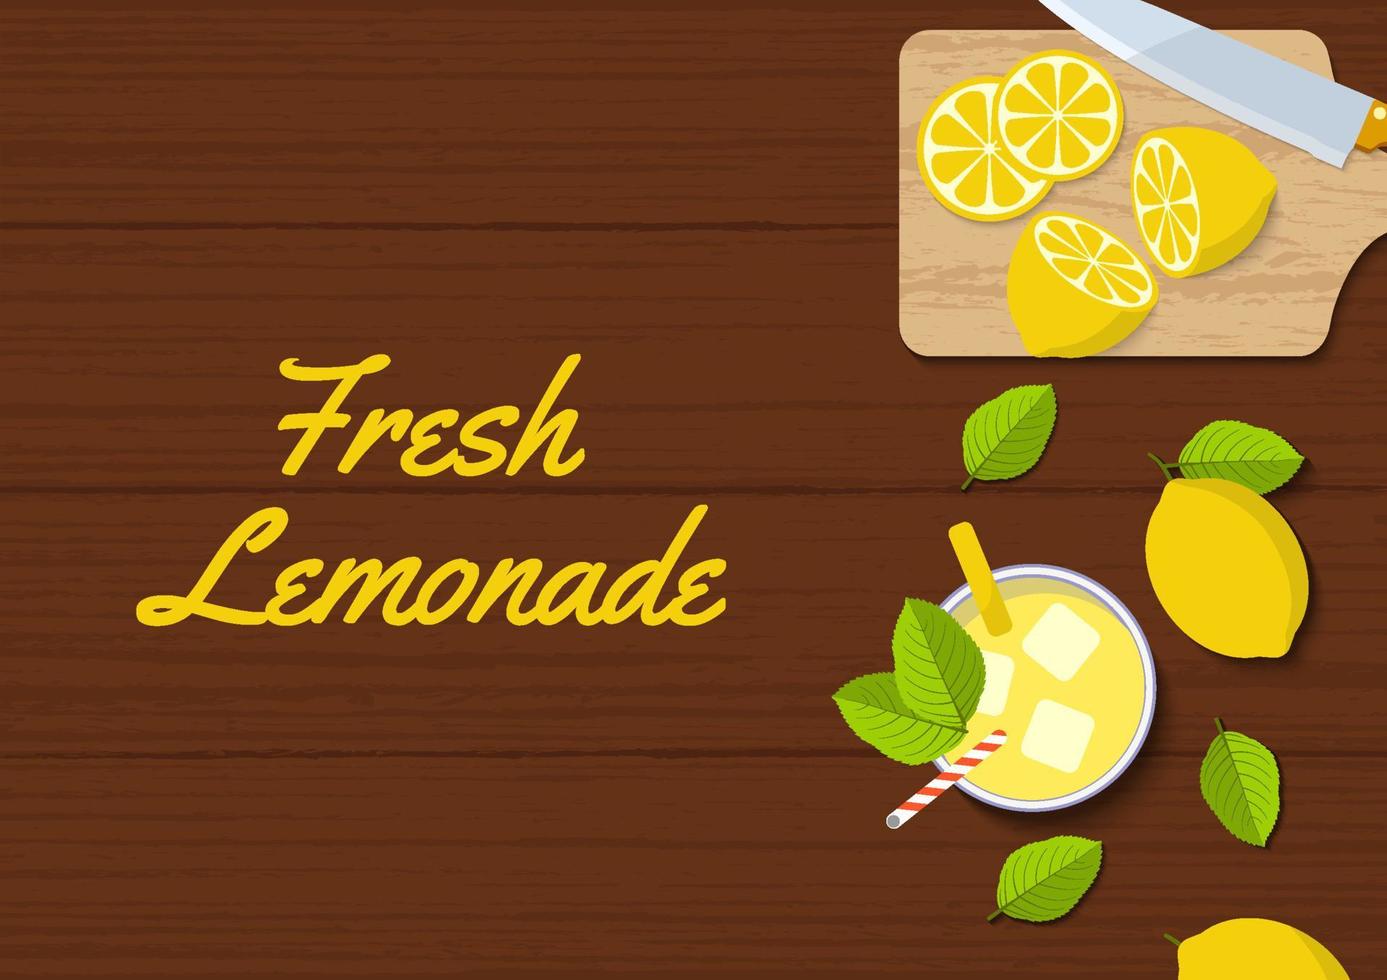 top view flat kitchen table design. fresh lemonade juice on wooden table from above with lemon fruit suitable for social media post, banner, flyer, restaurant or cafe menu list, and more vector